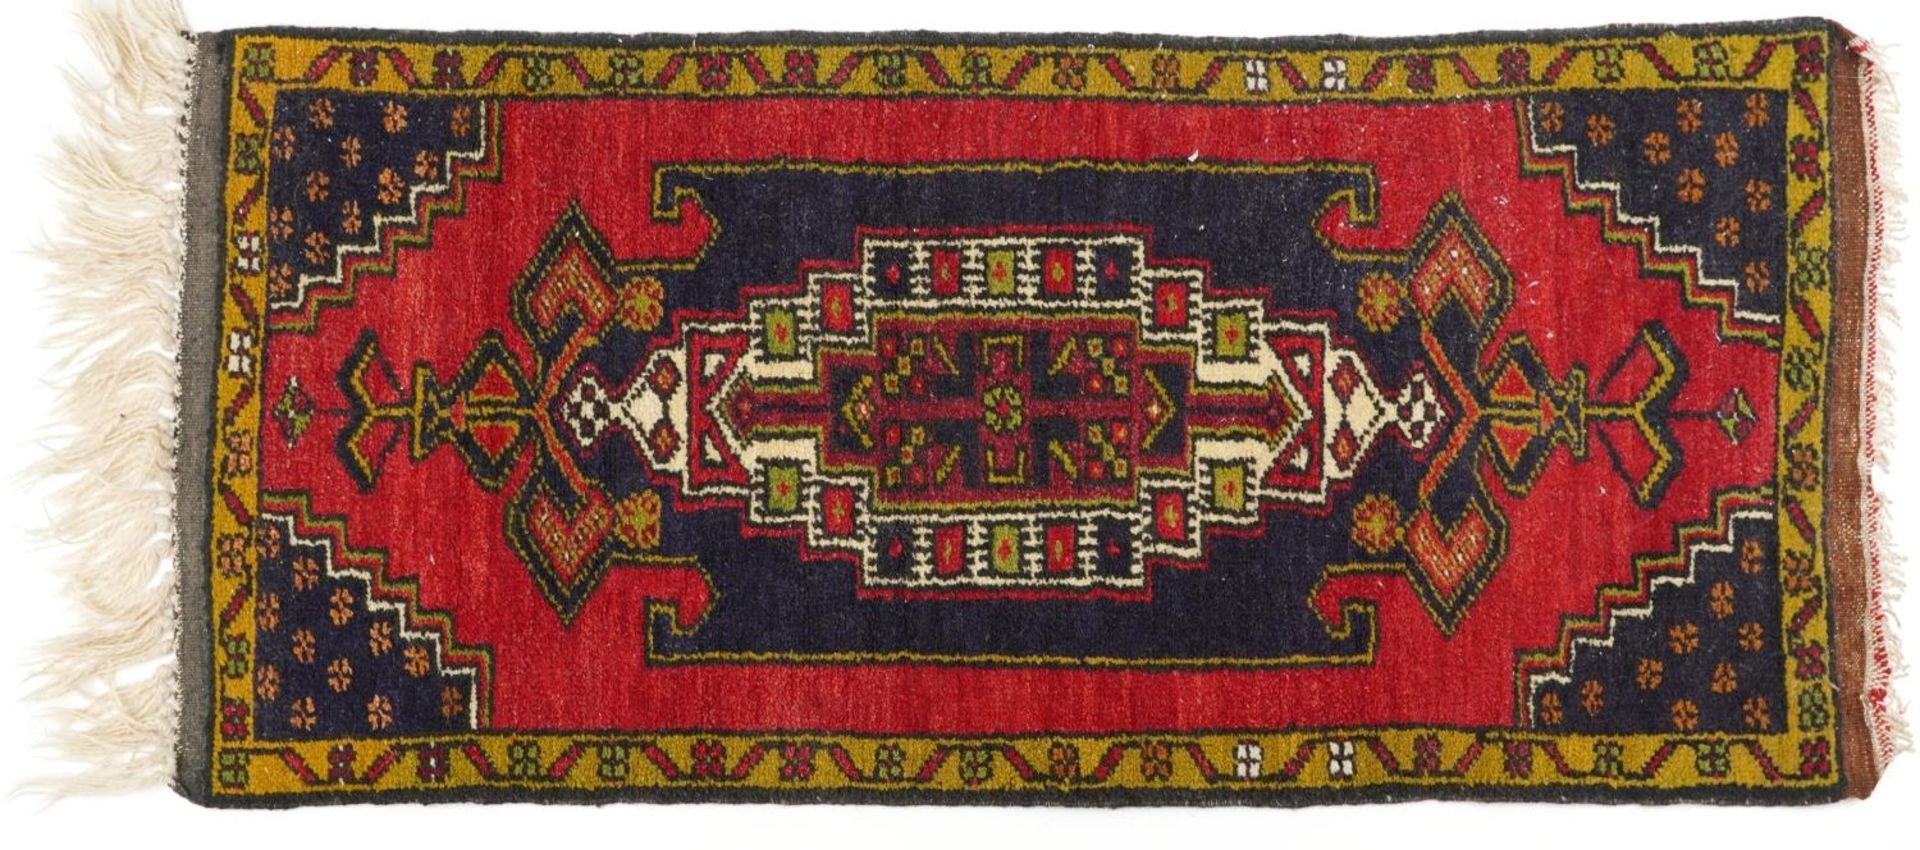 Rectangular Persian red and blue ground rug having an allover repeat floral design, 120cm x 53.5cm